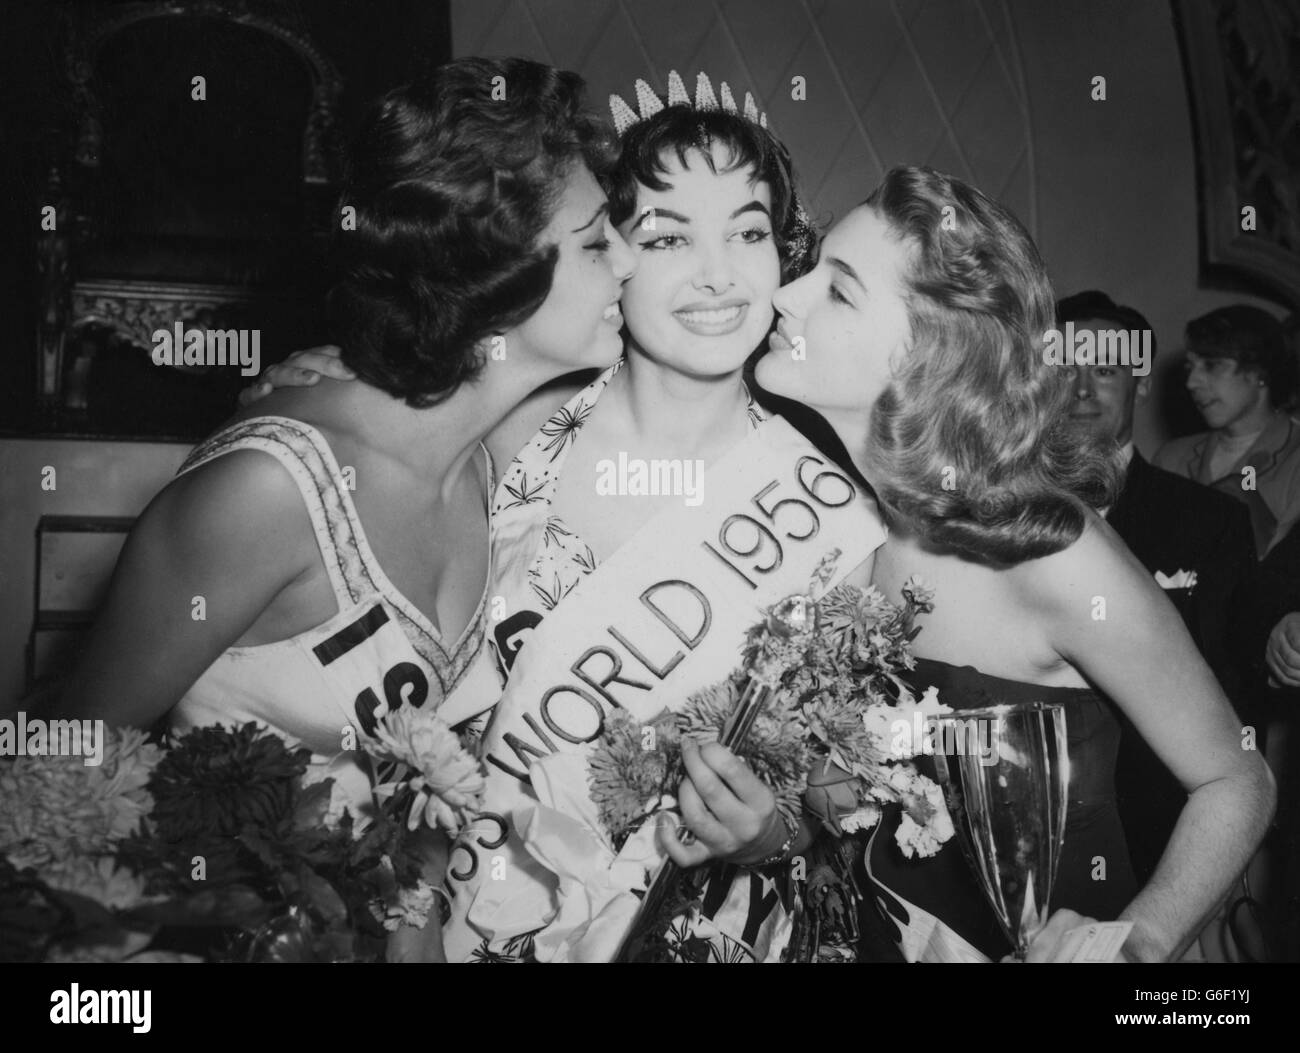 Petra Schurmann, of Germany, gets a victory salute from Miss World runners-up Betty Lane Cherry (r) and 'Miss Isreal' Rina Weiss, after winning the Miss World title in the final of the title Miss World 1956 contest held at the Lyceum, Strand, London. Betty Lane Cherry came second in the contest for the second year running and Rina was third. Stock Photo